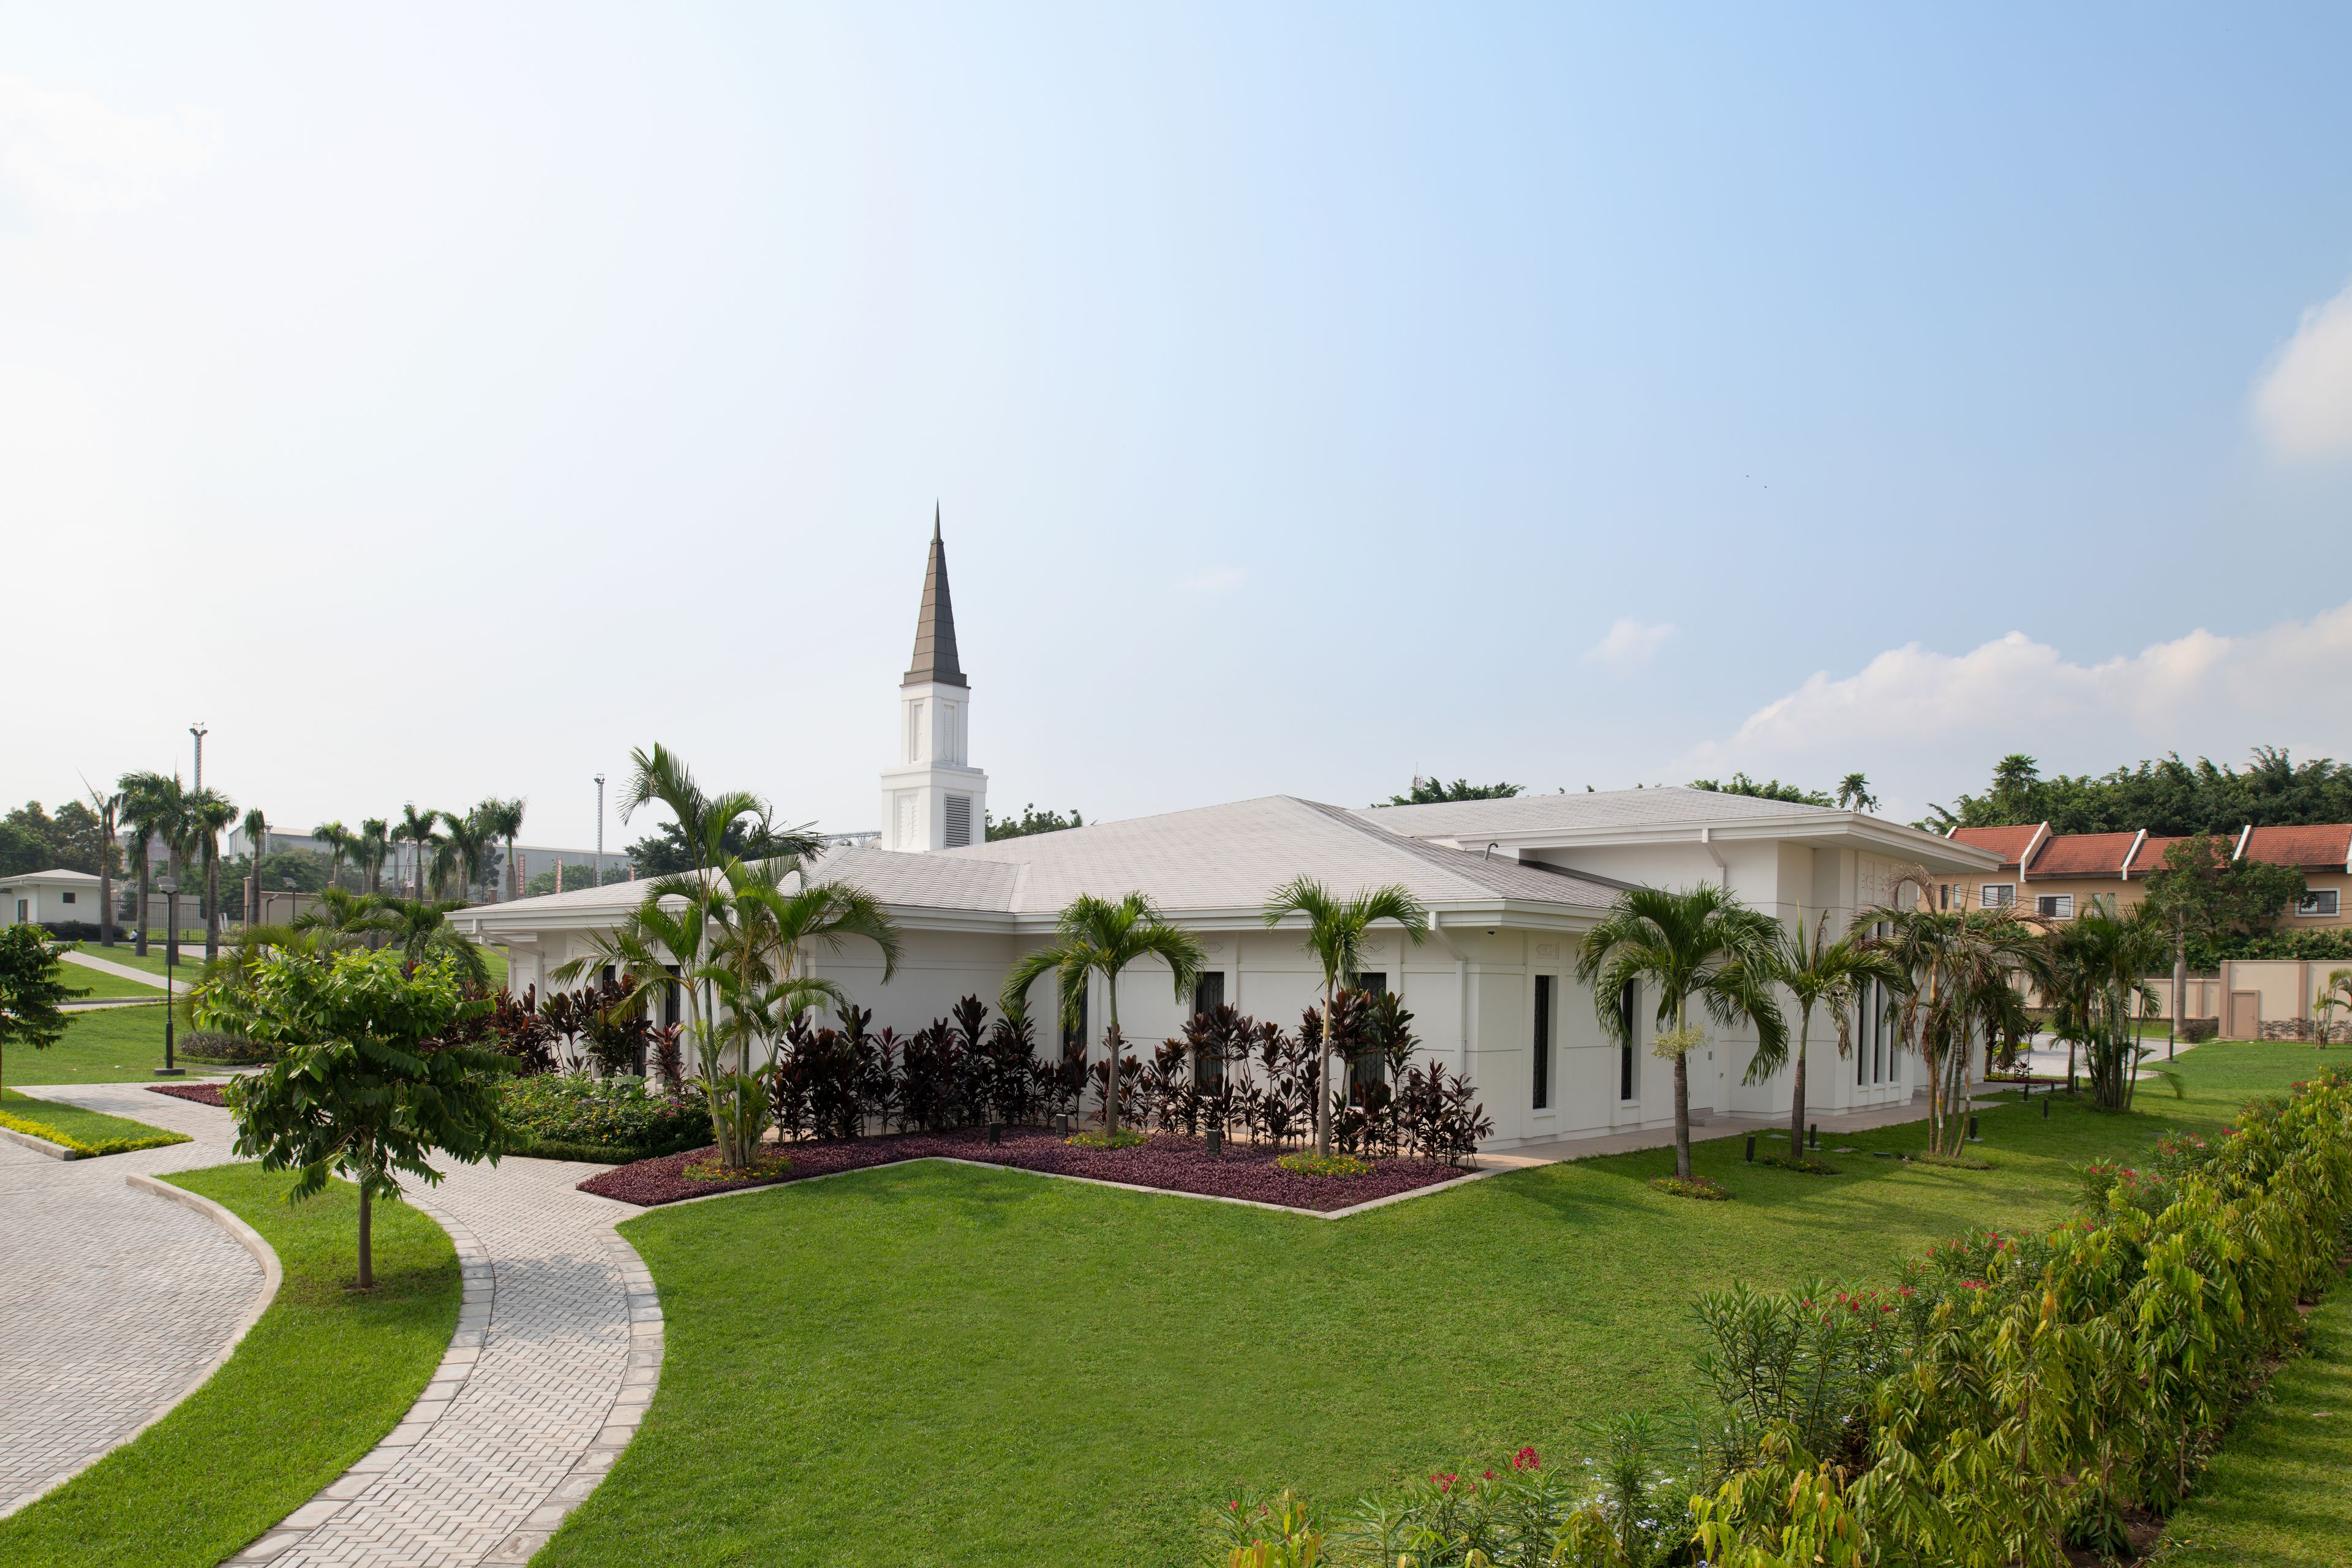 An exterior view of the Kinshasa Democratic Republic of the Congo Temple showing the front walkway and grounds.